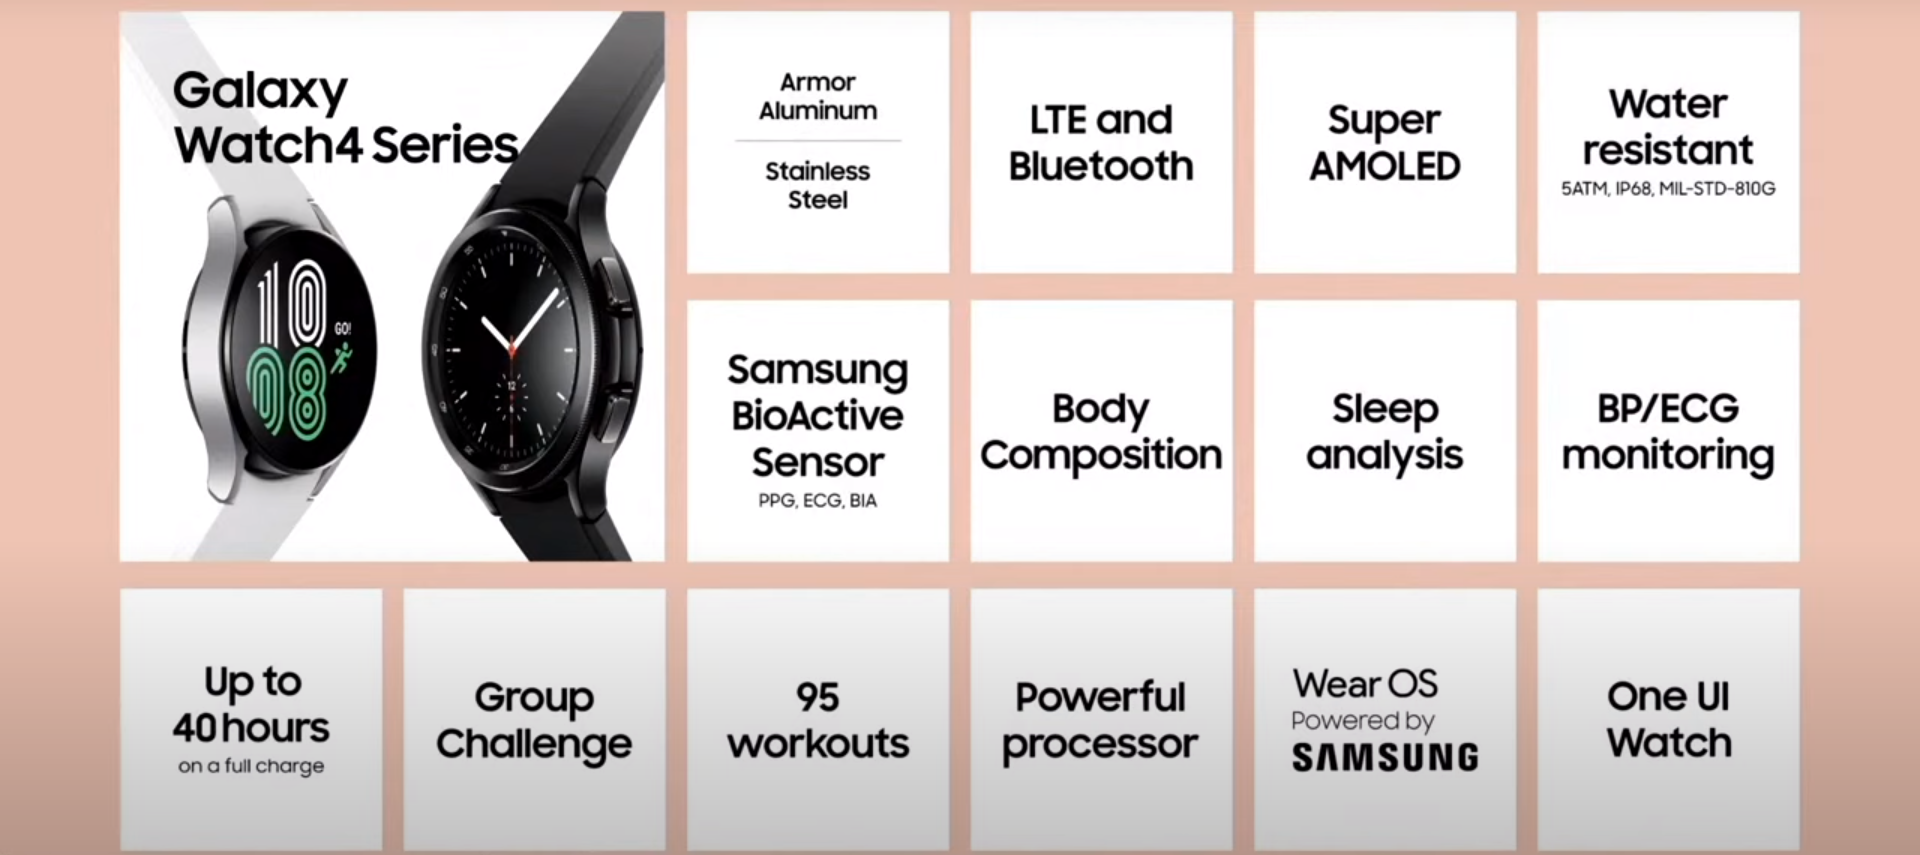 Galaxy Watch4 Overview